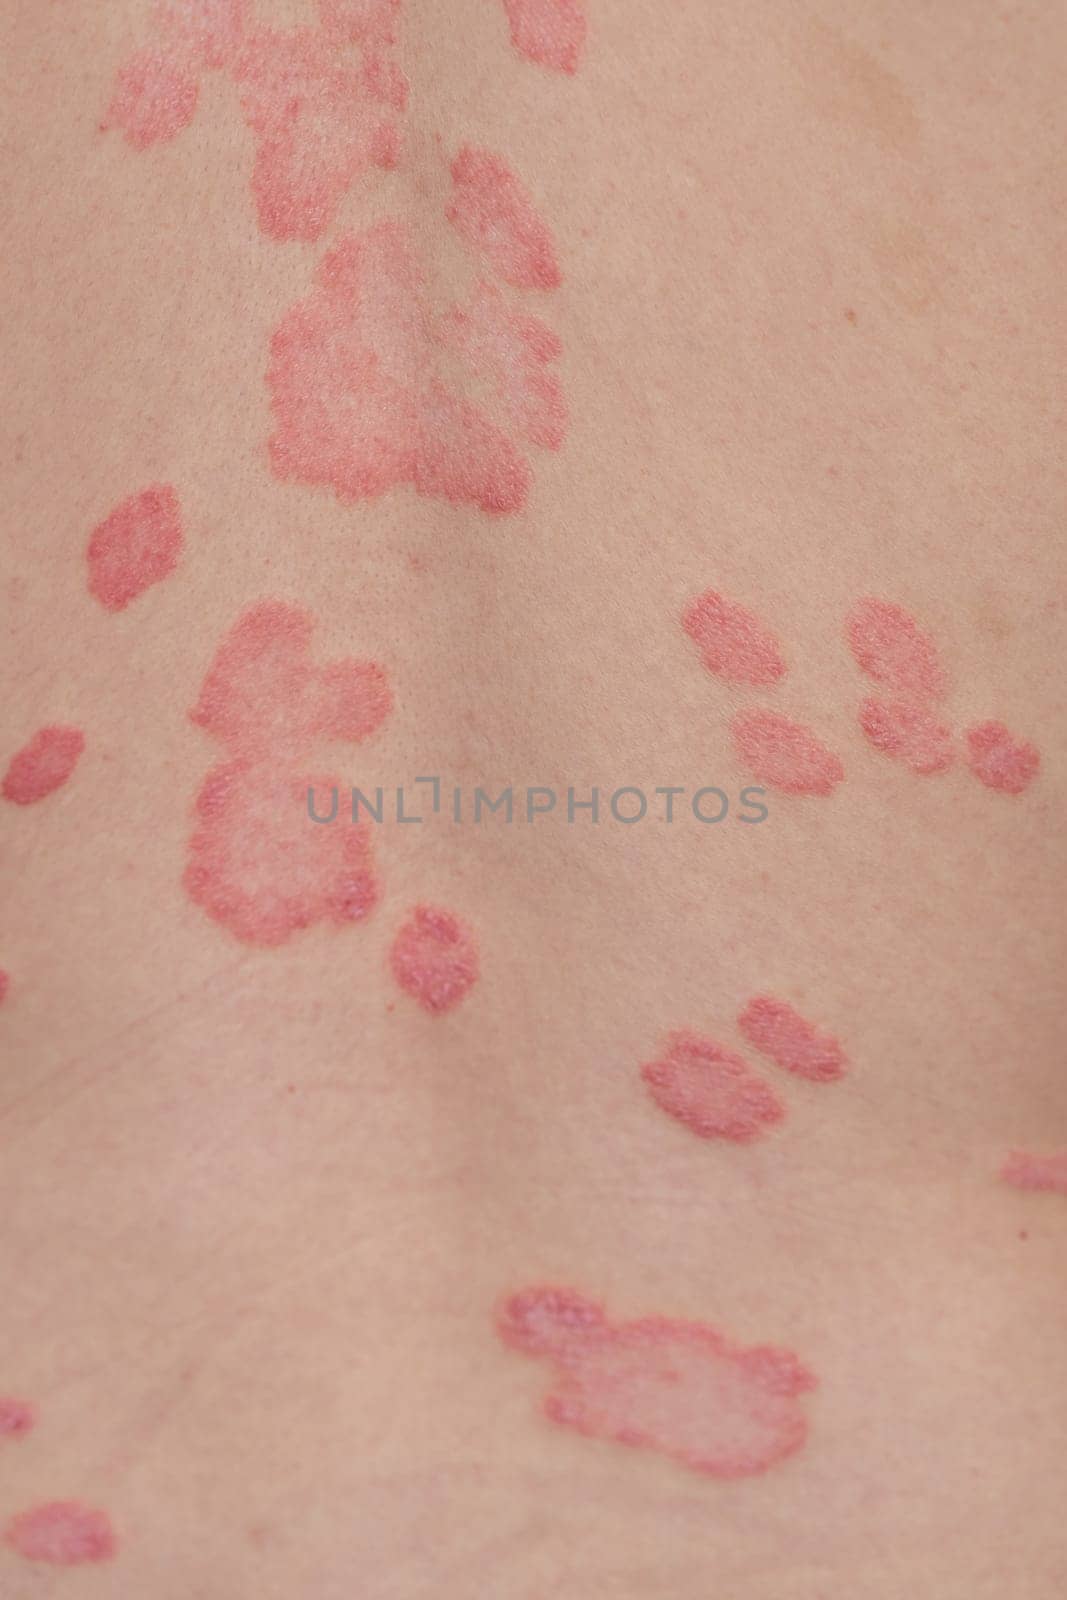 Psoriasis Vulgaris, skin patches are typically red, itchy, and scaly. Papules of chronic psoriasis vulgaris on male hand, back and body. Genetic immune disease. Detail of psoriatic skin disease